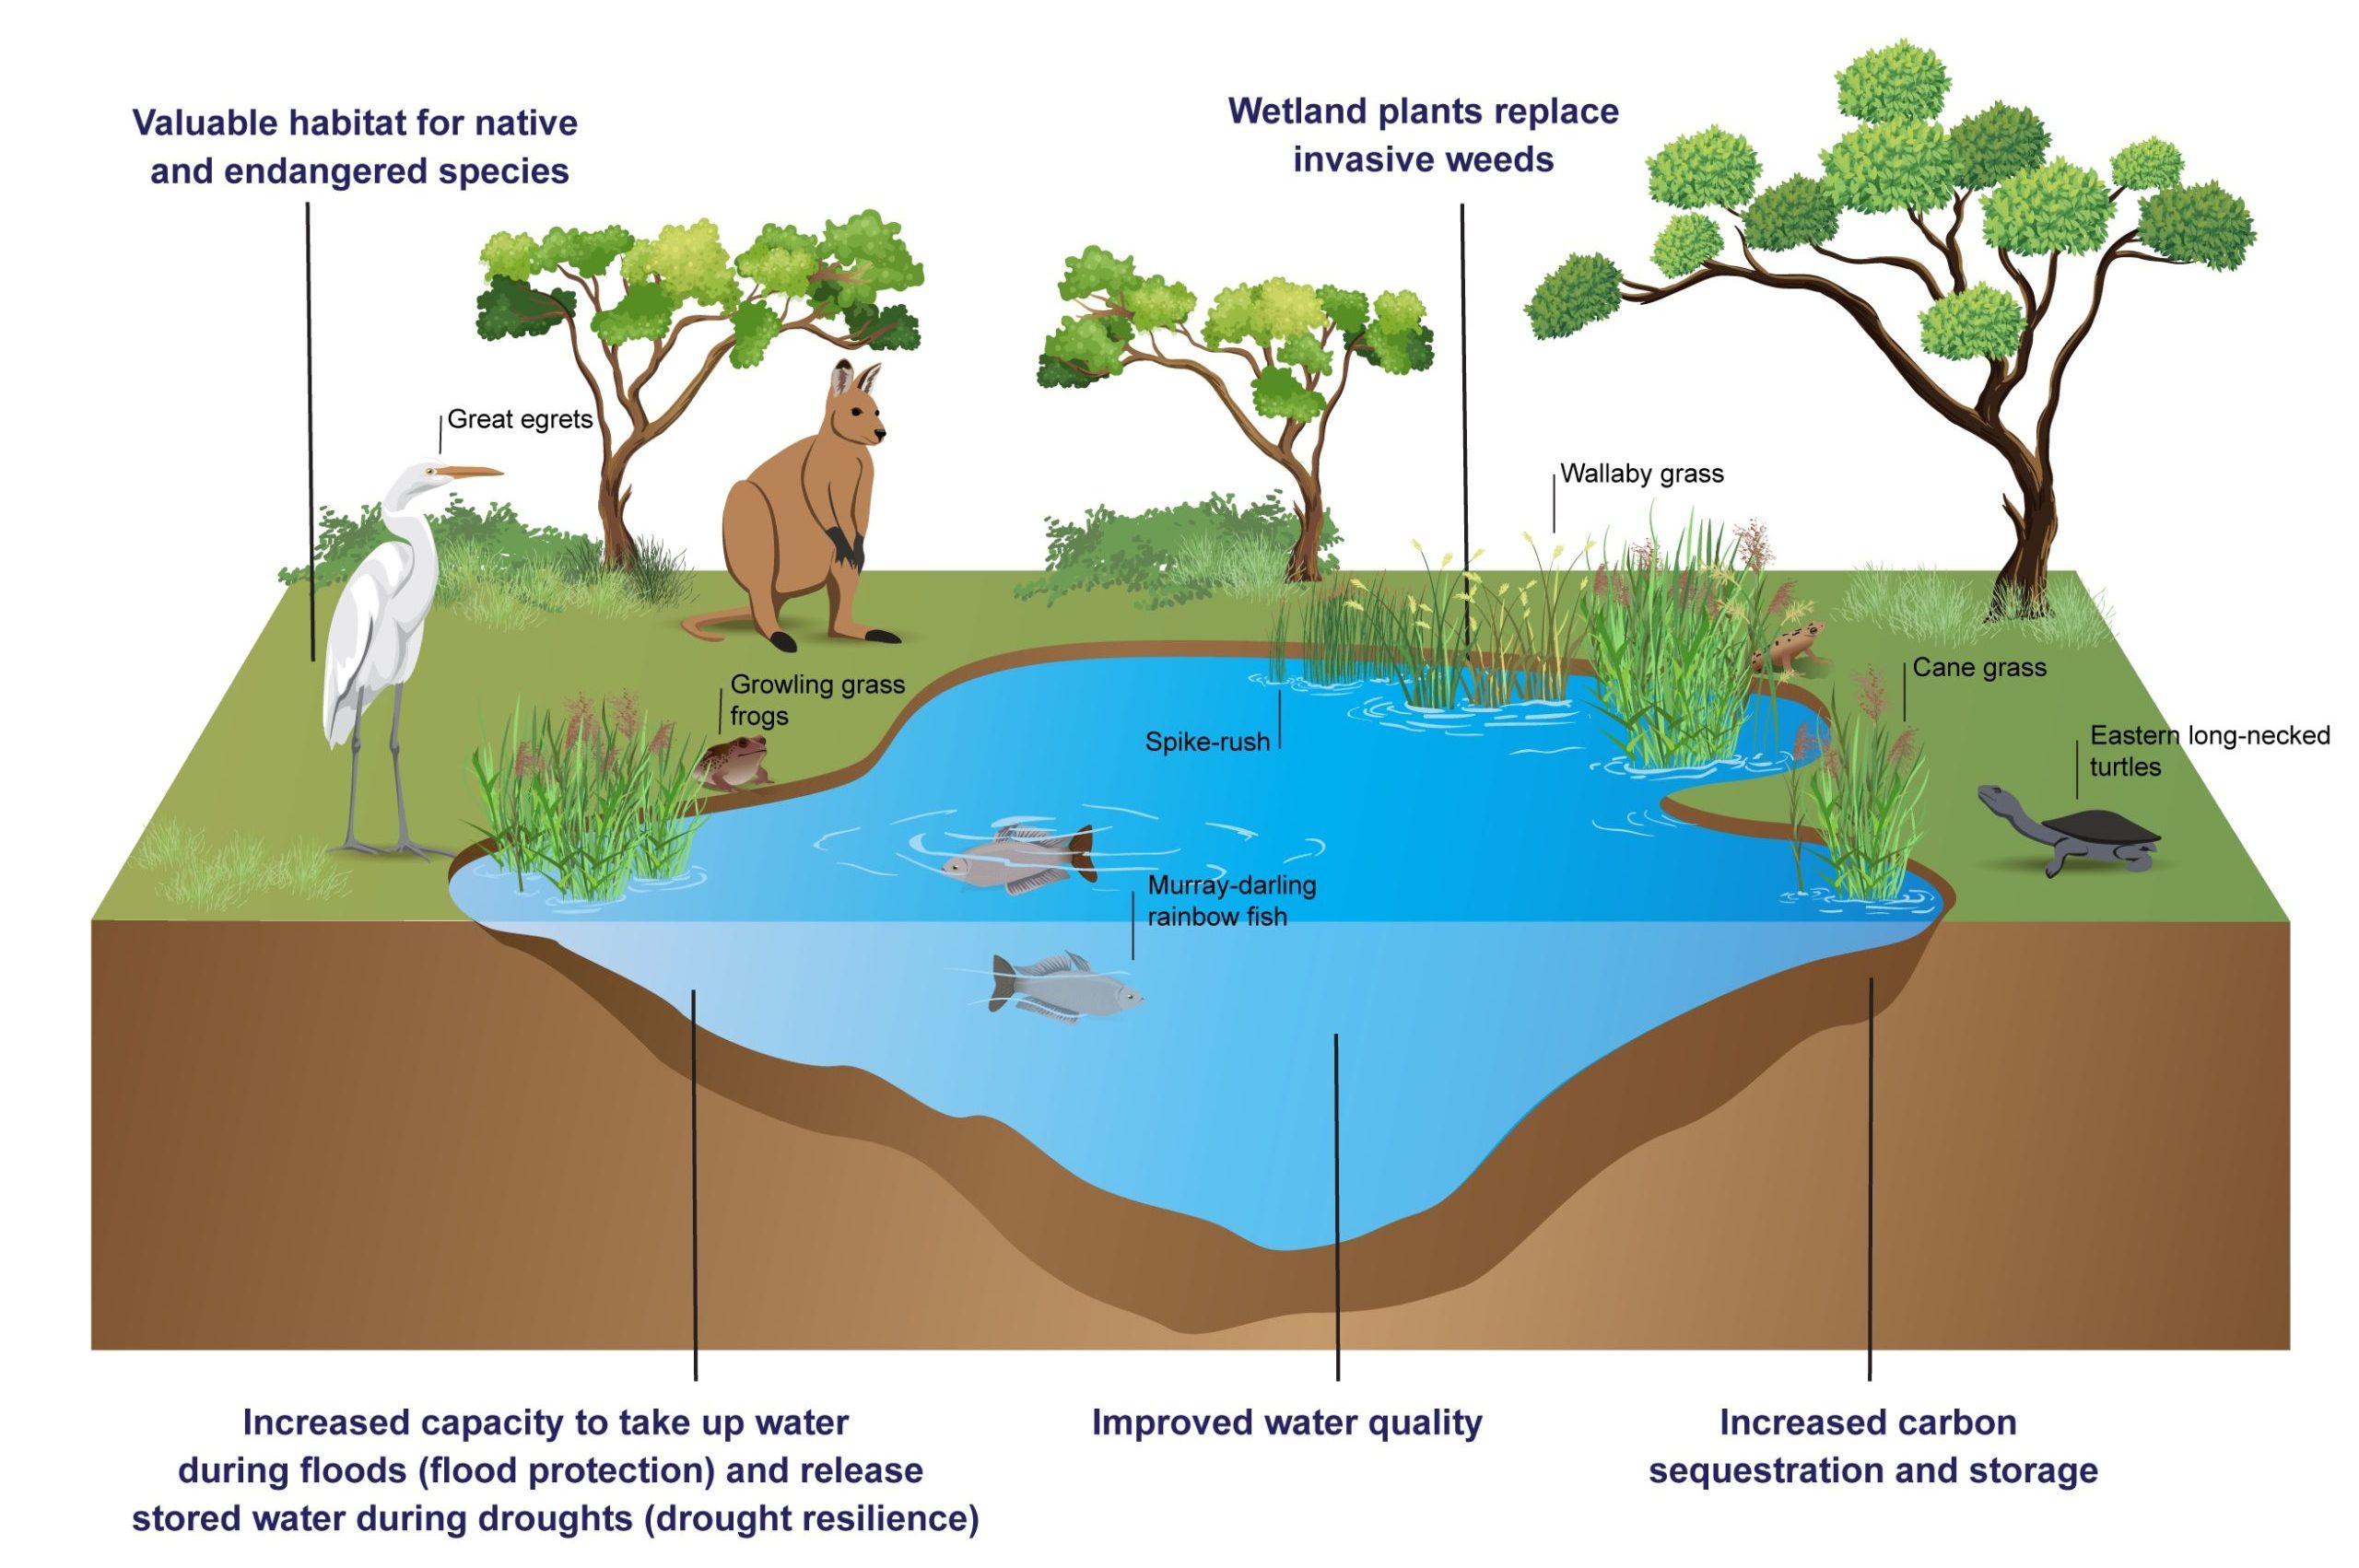 Benefits of resotring freshwater wetlands using rewetting and revegetation techniques